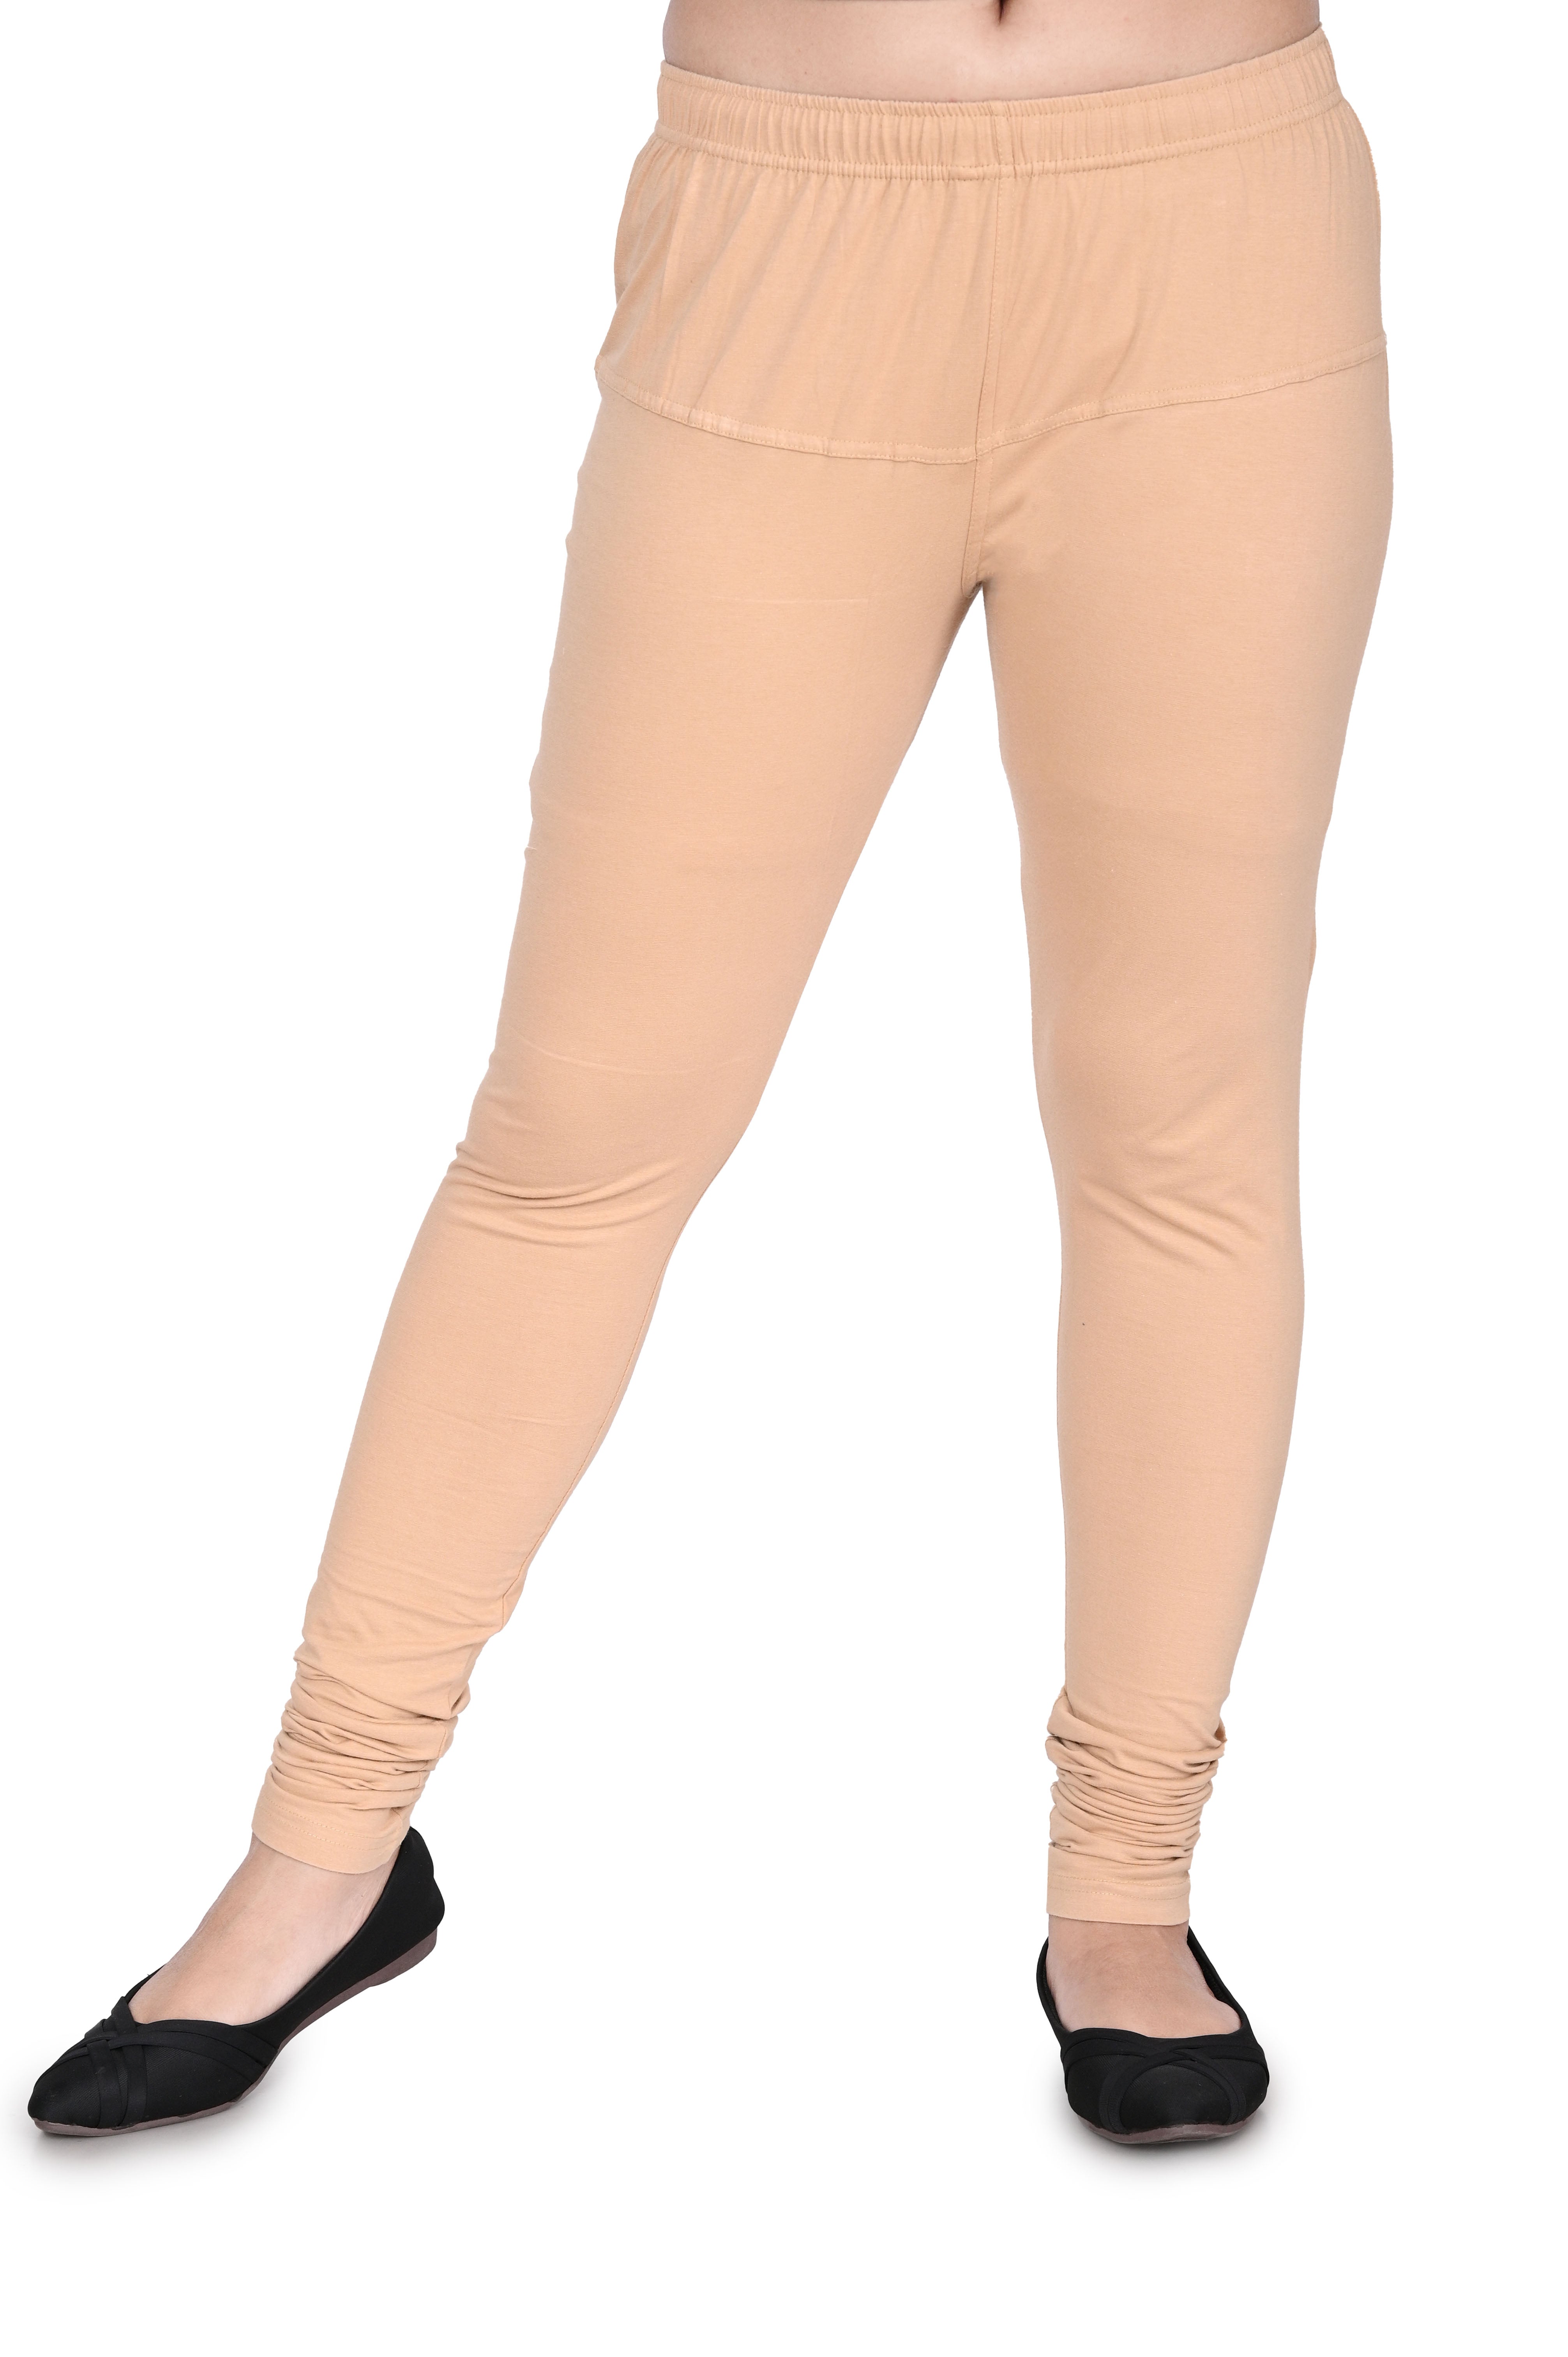 Buy 1LY GARMENTS, WOMENS SUPER SOFT LEGGINGS IN COTTON LYCRA COMBO PACK OF  3 (TURQ, SKIN, ORANGE) at